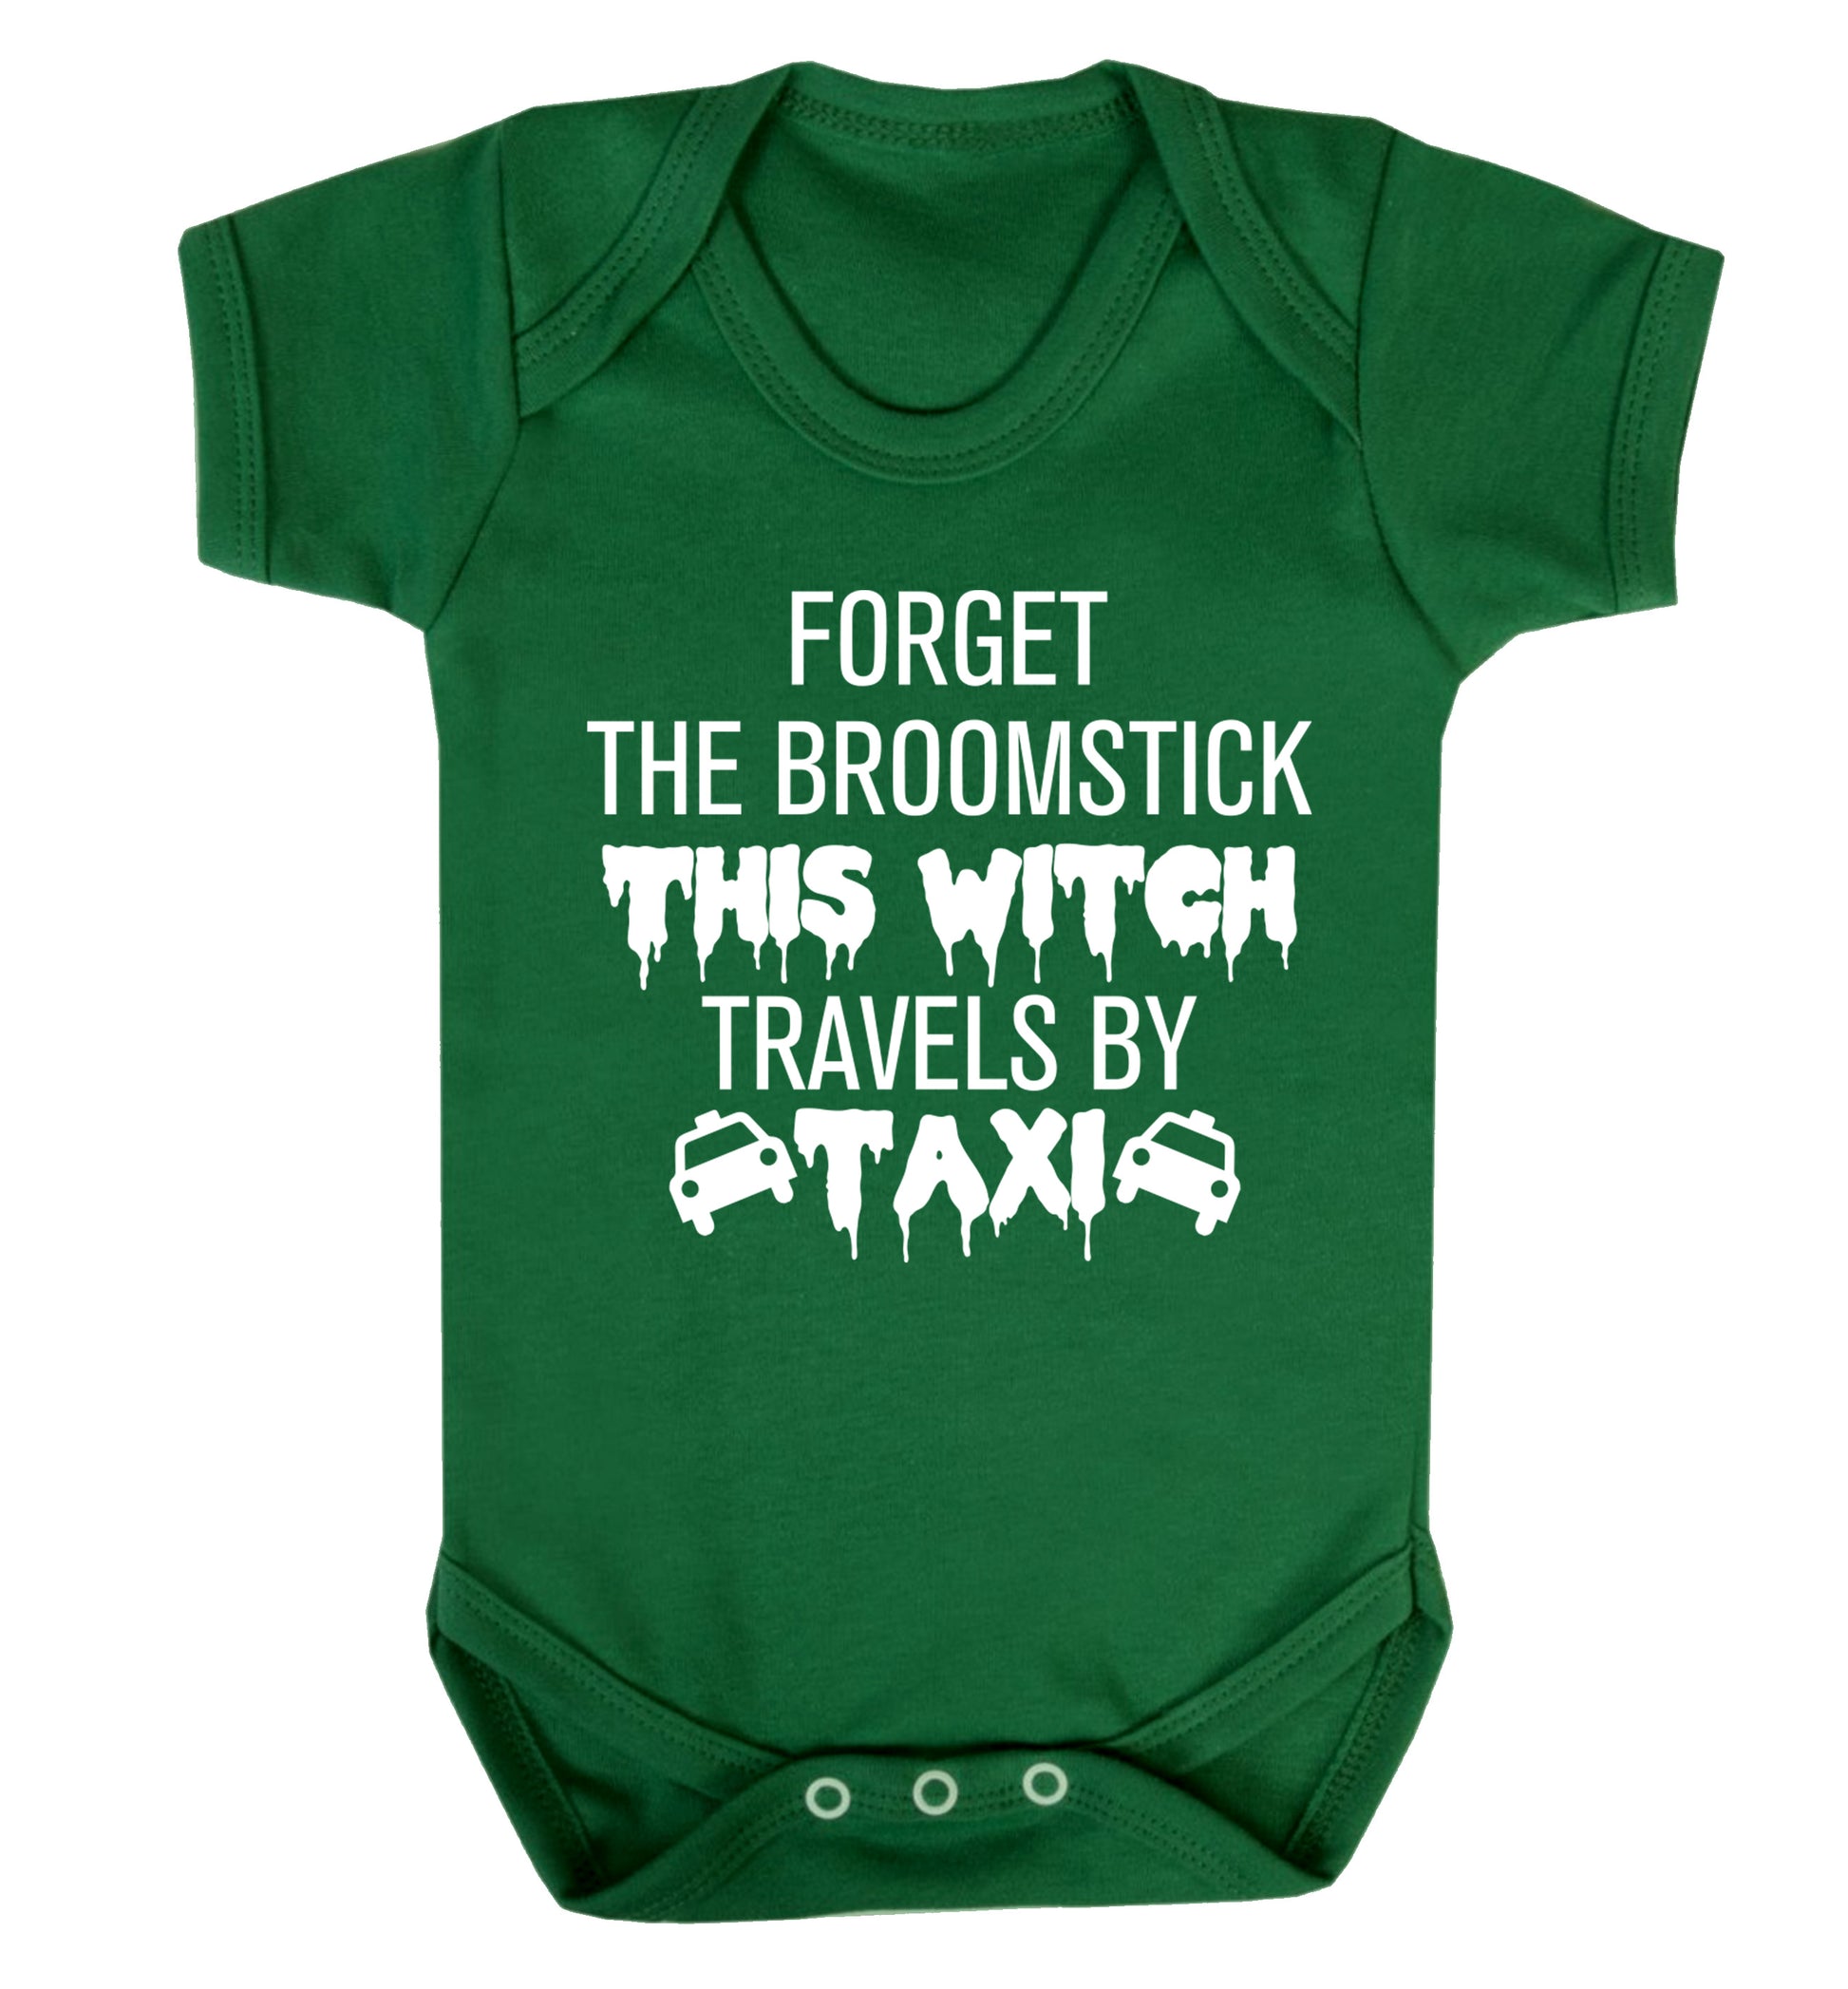 Forget the broomstick this witch travels by taxi Baby Vest green 18-24 months